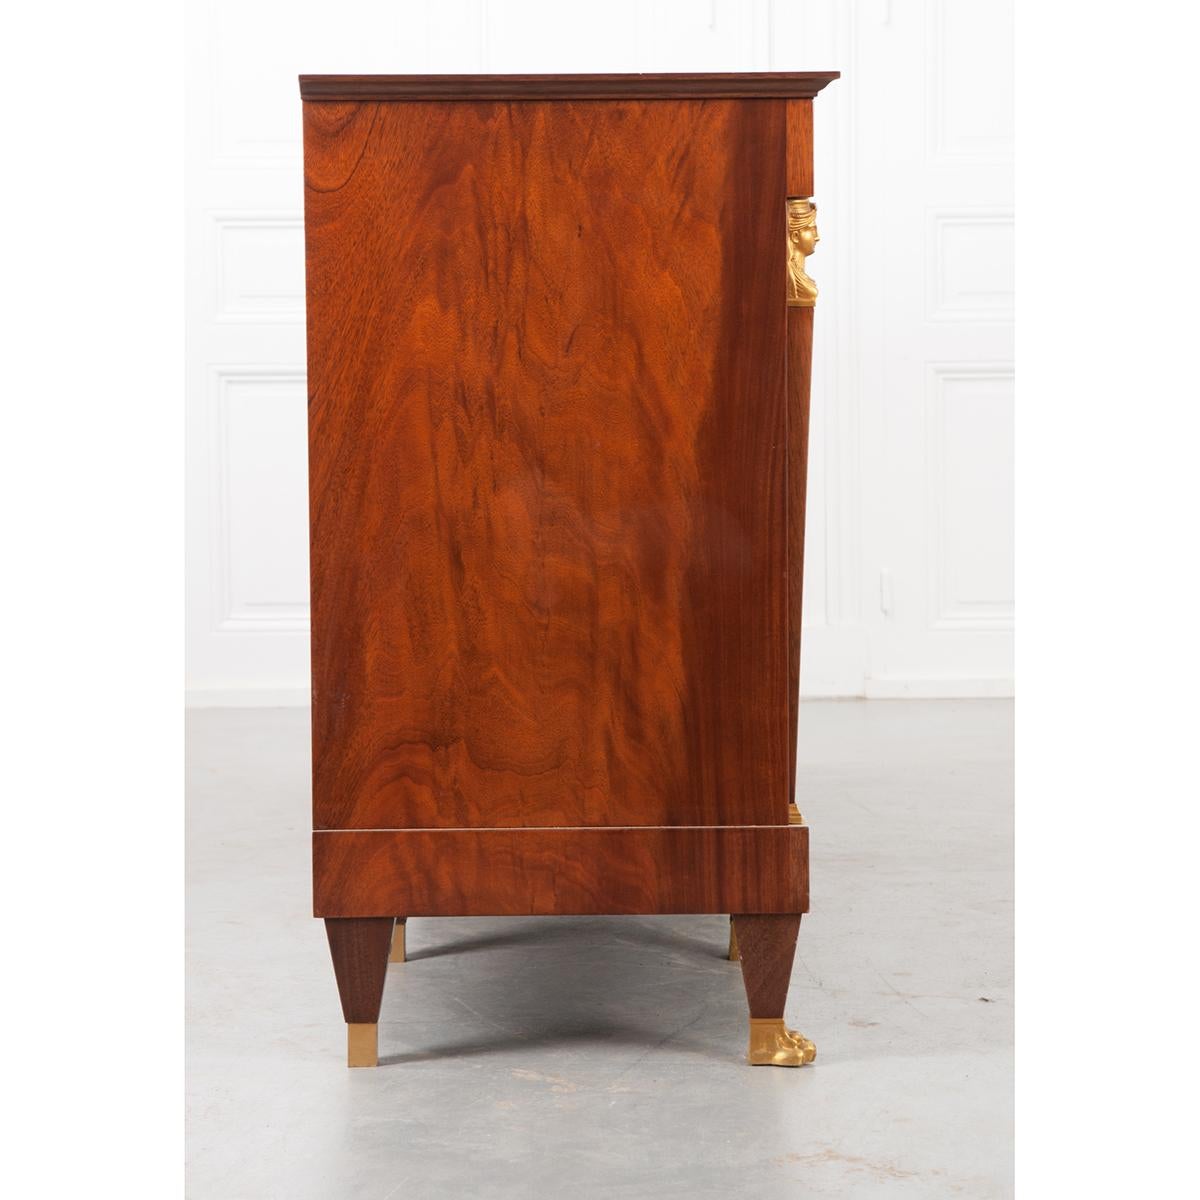 A good looking 20th century Empire-style enfilade. This mahogany piece comes from France and is in good condition. It has a green marble top sitting over four drawers. The two center drawers have keyholes and brass escutcheons with keys and the two